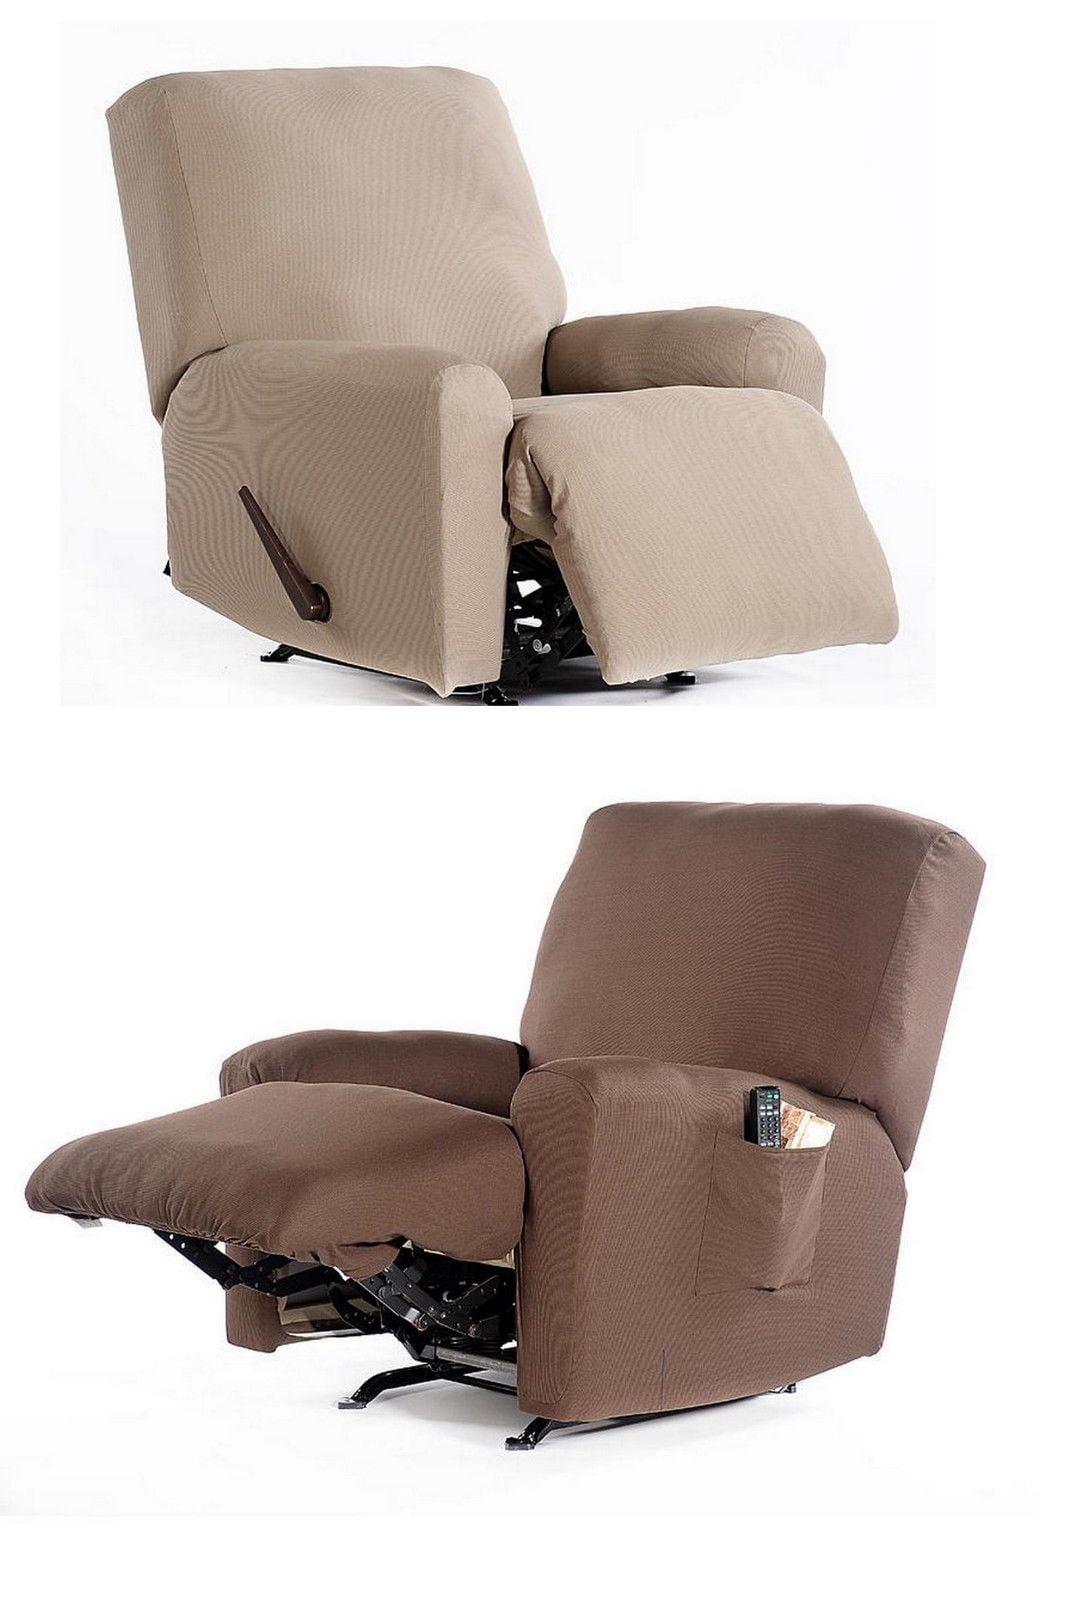 Recliner Chair Stretch Fabric Slip cover 4-piece Set Complete Cover tight  fit TAN